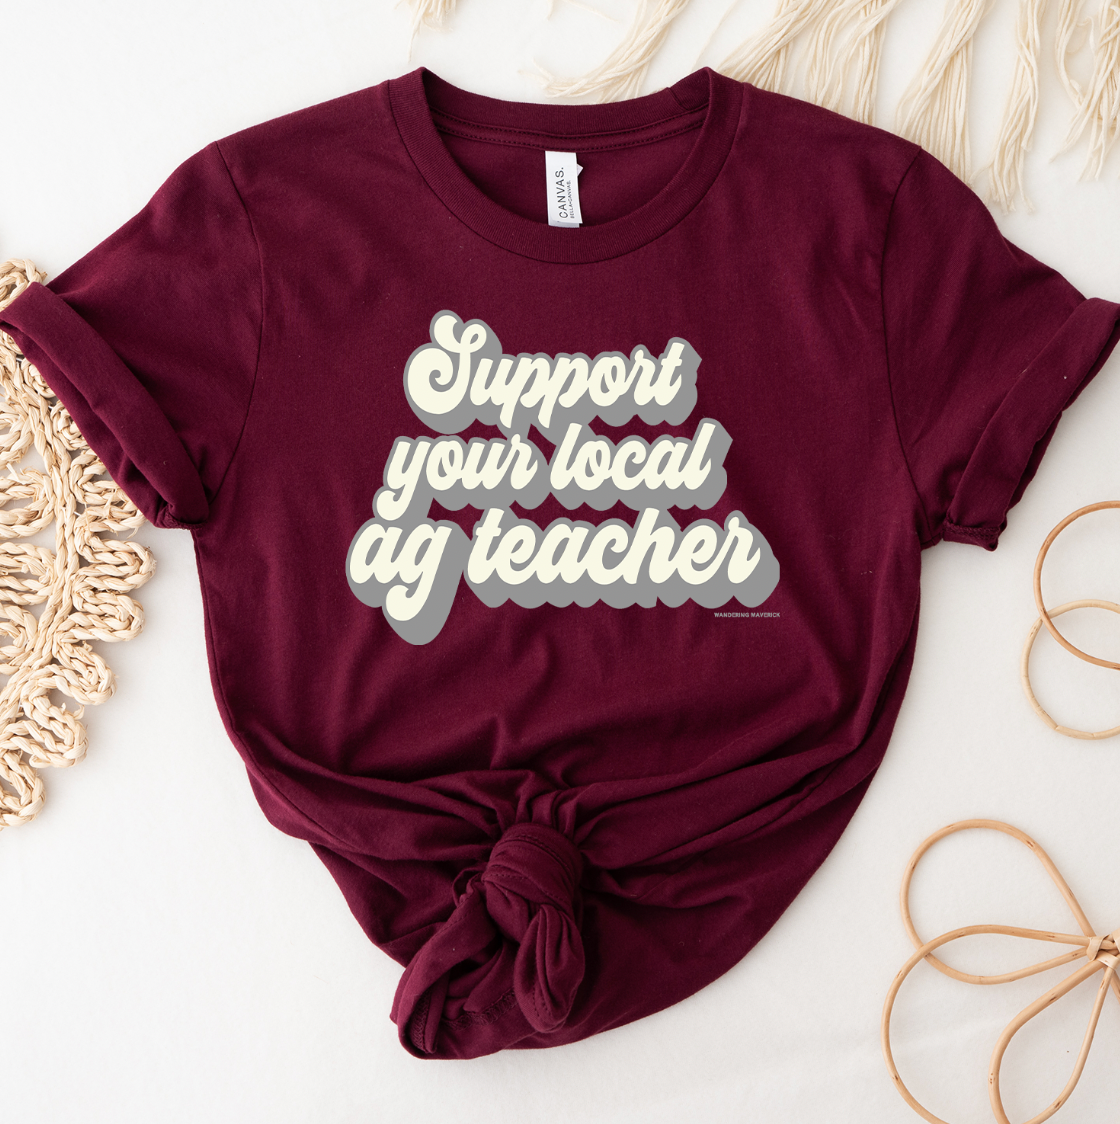 Retro Support Your Local AG Teacher Grey Ink T-Shirt (XS-4XL) - Multiple Colors!